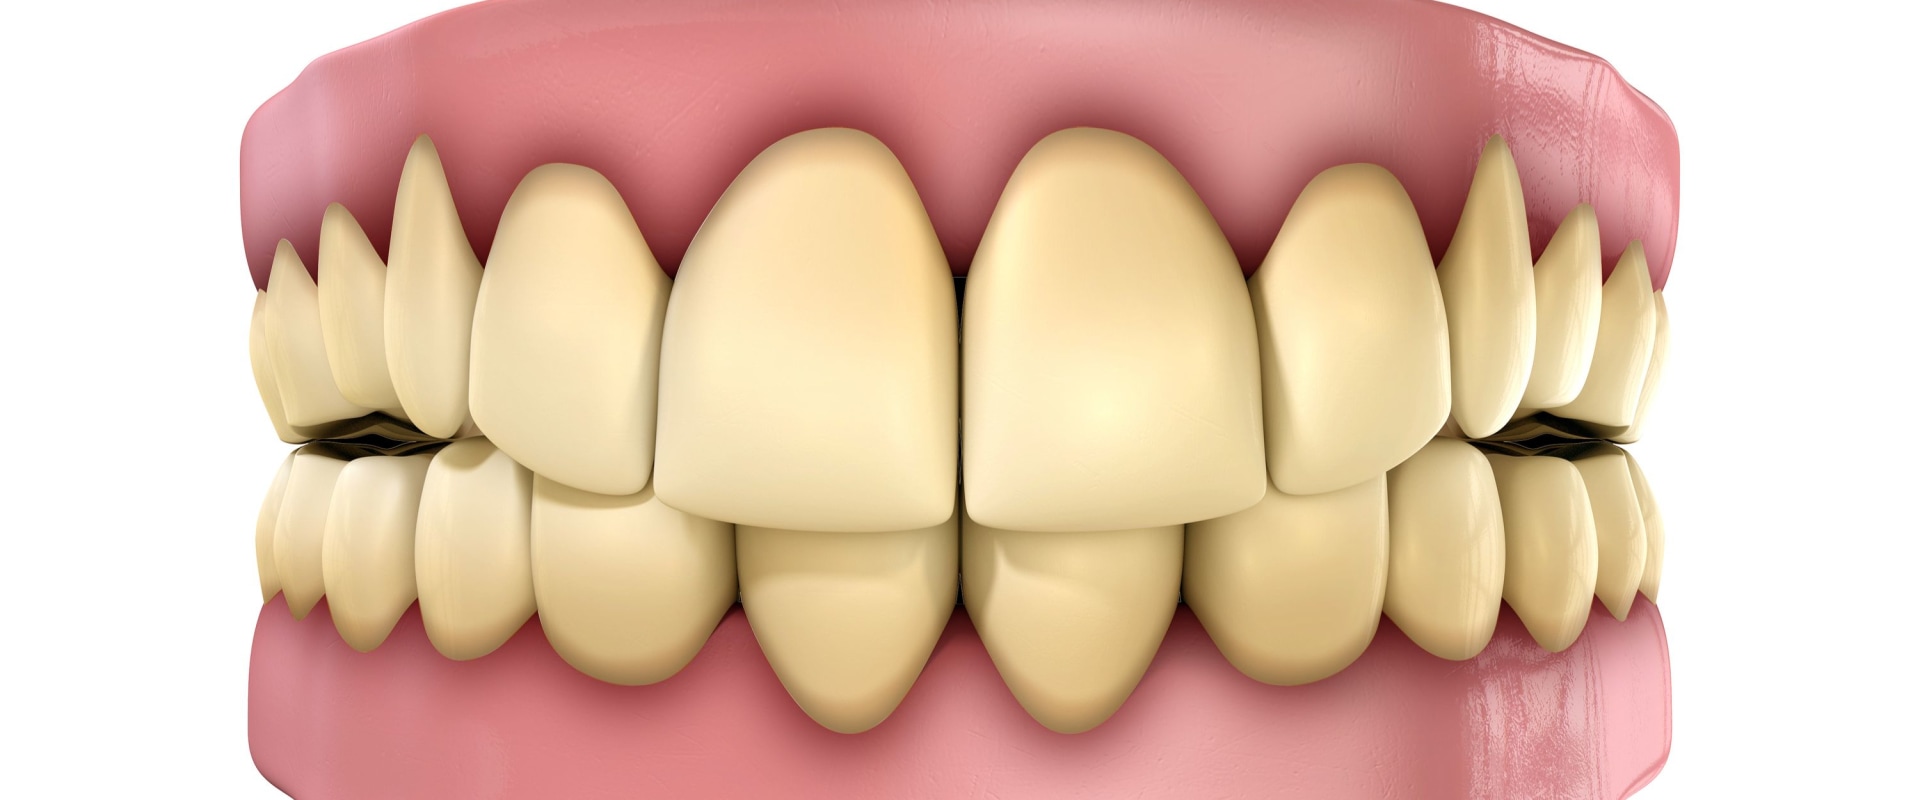 Understanding the Causes of Tooth Discoloration